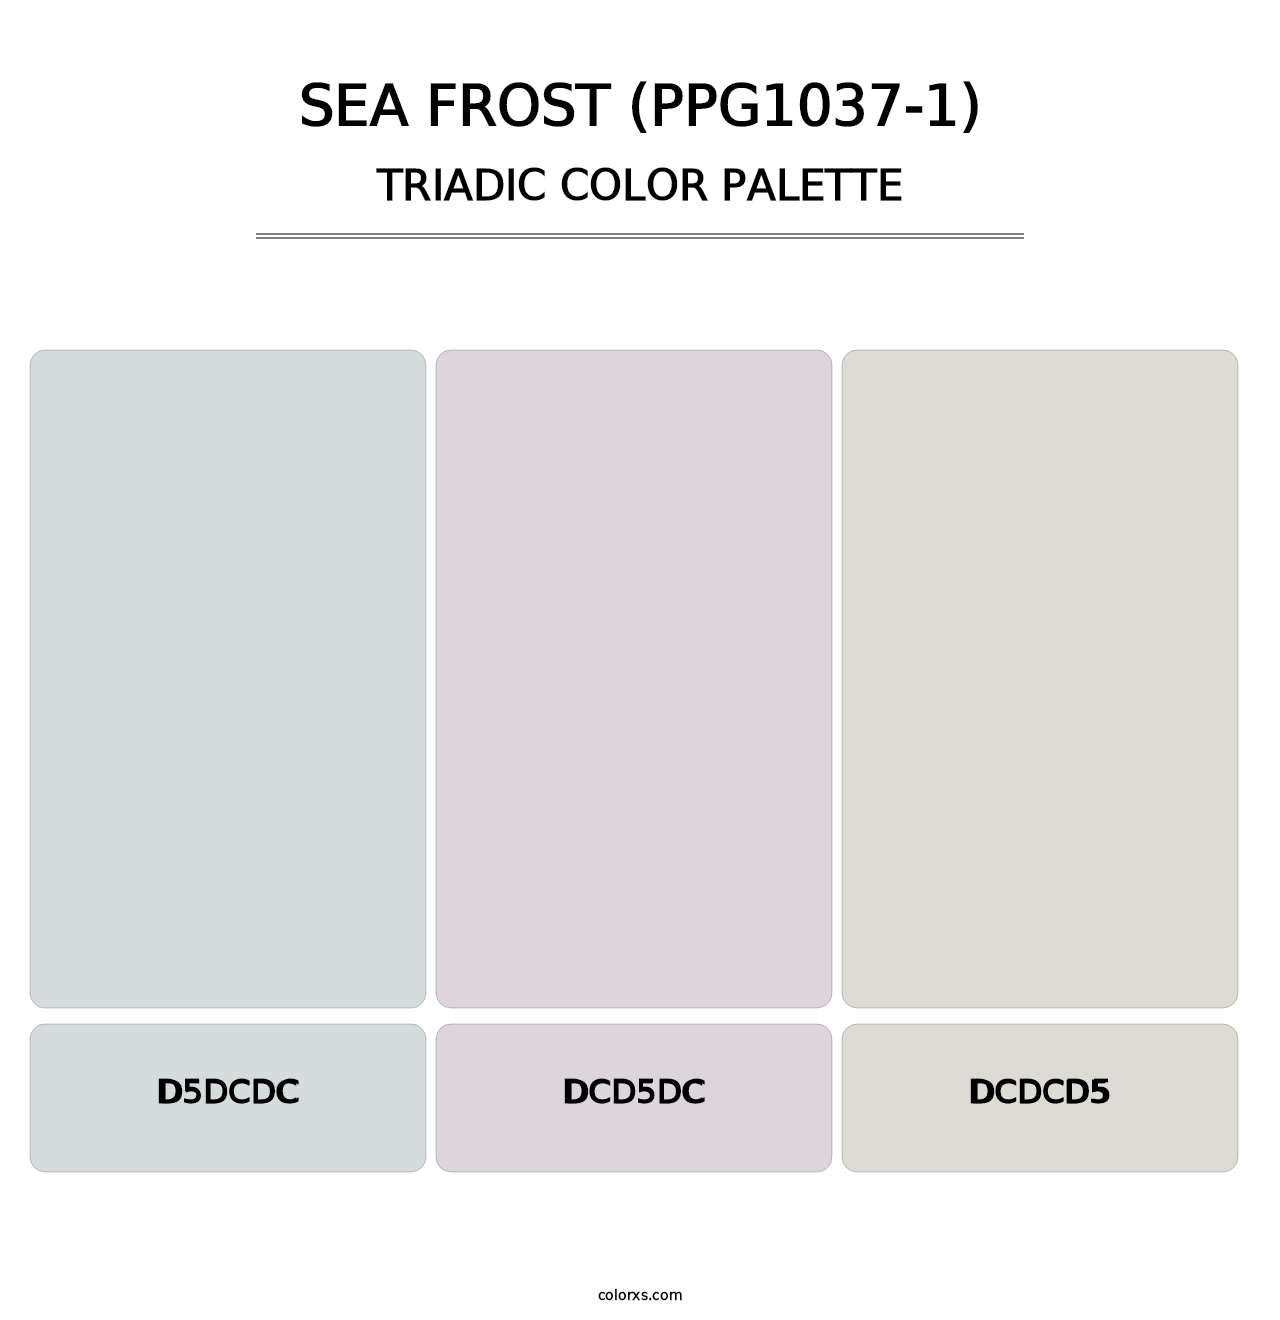 Sea Frost (PPG1037-1) - Triadic Color Palette